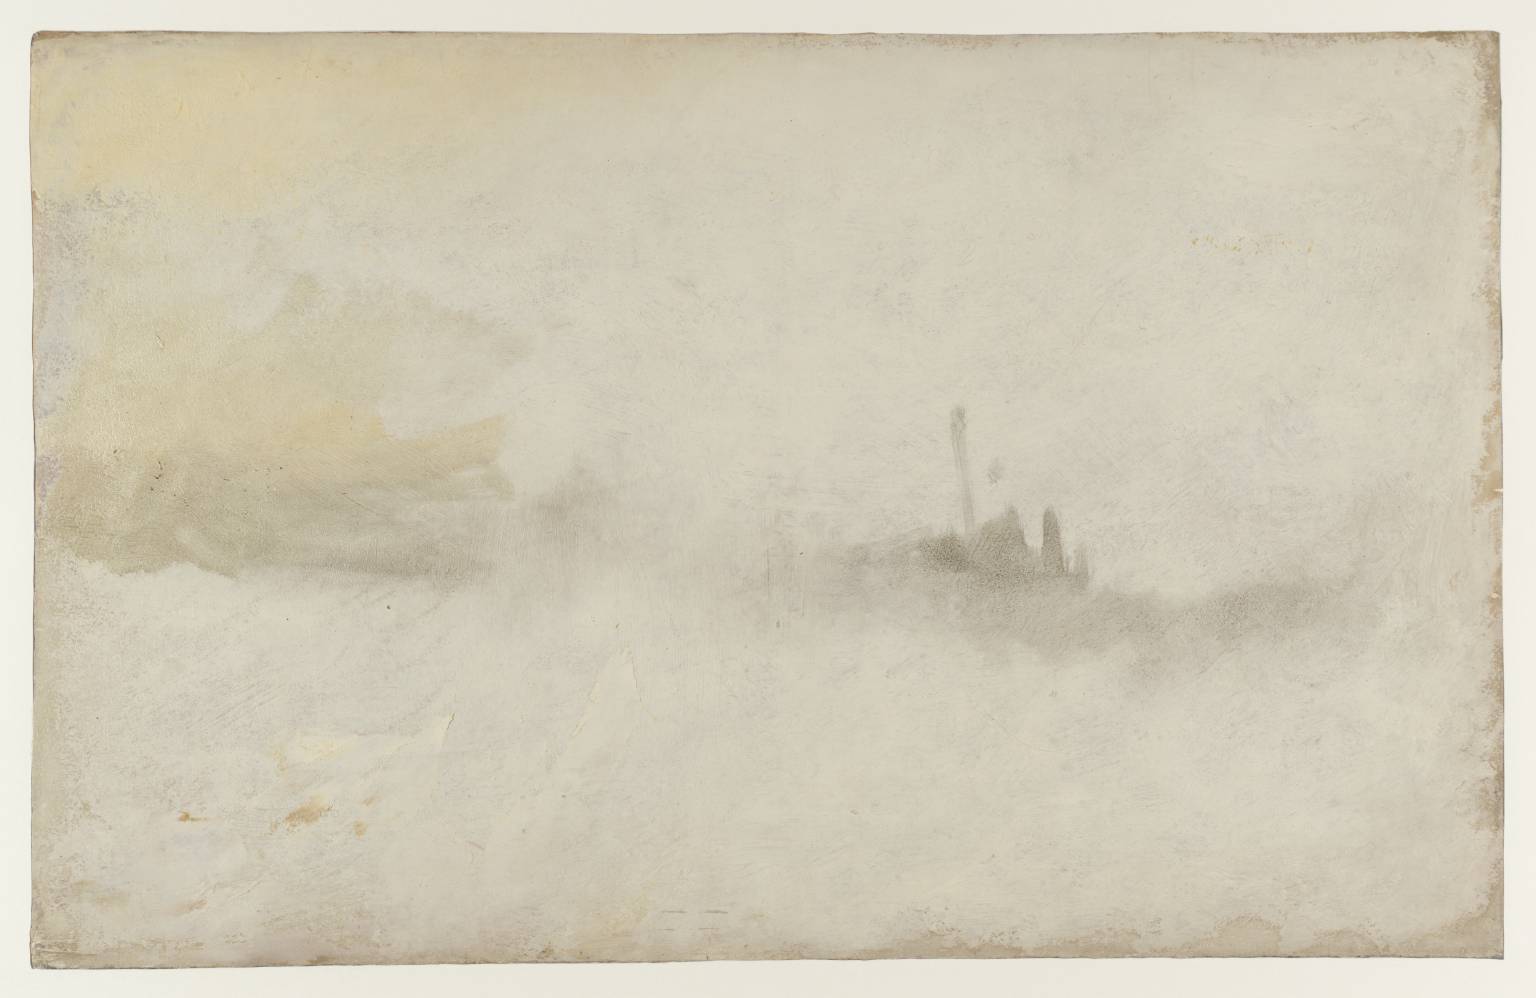 Ship in a Storm (1845).